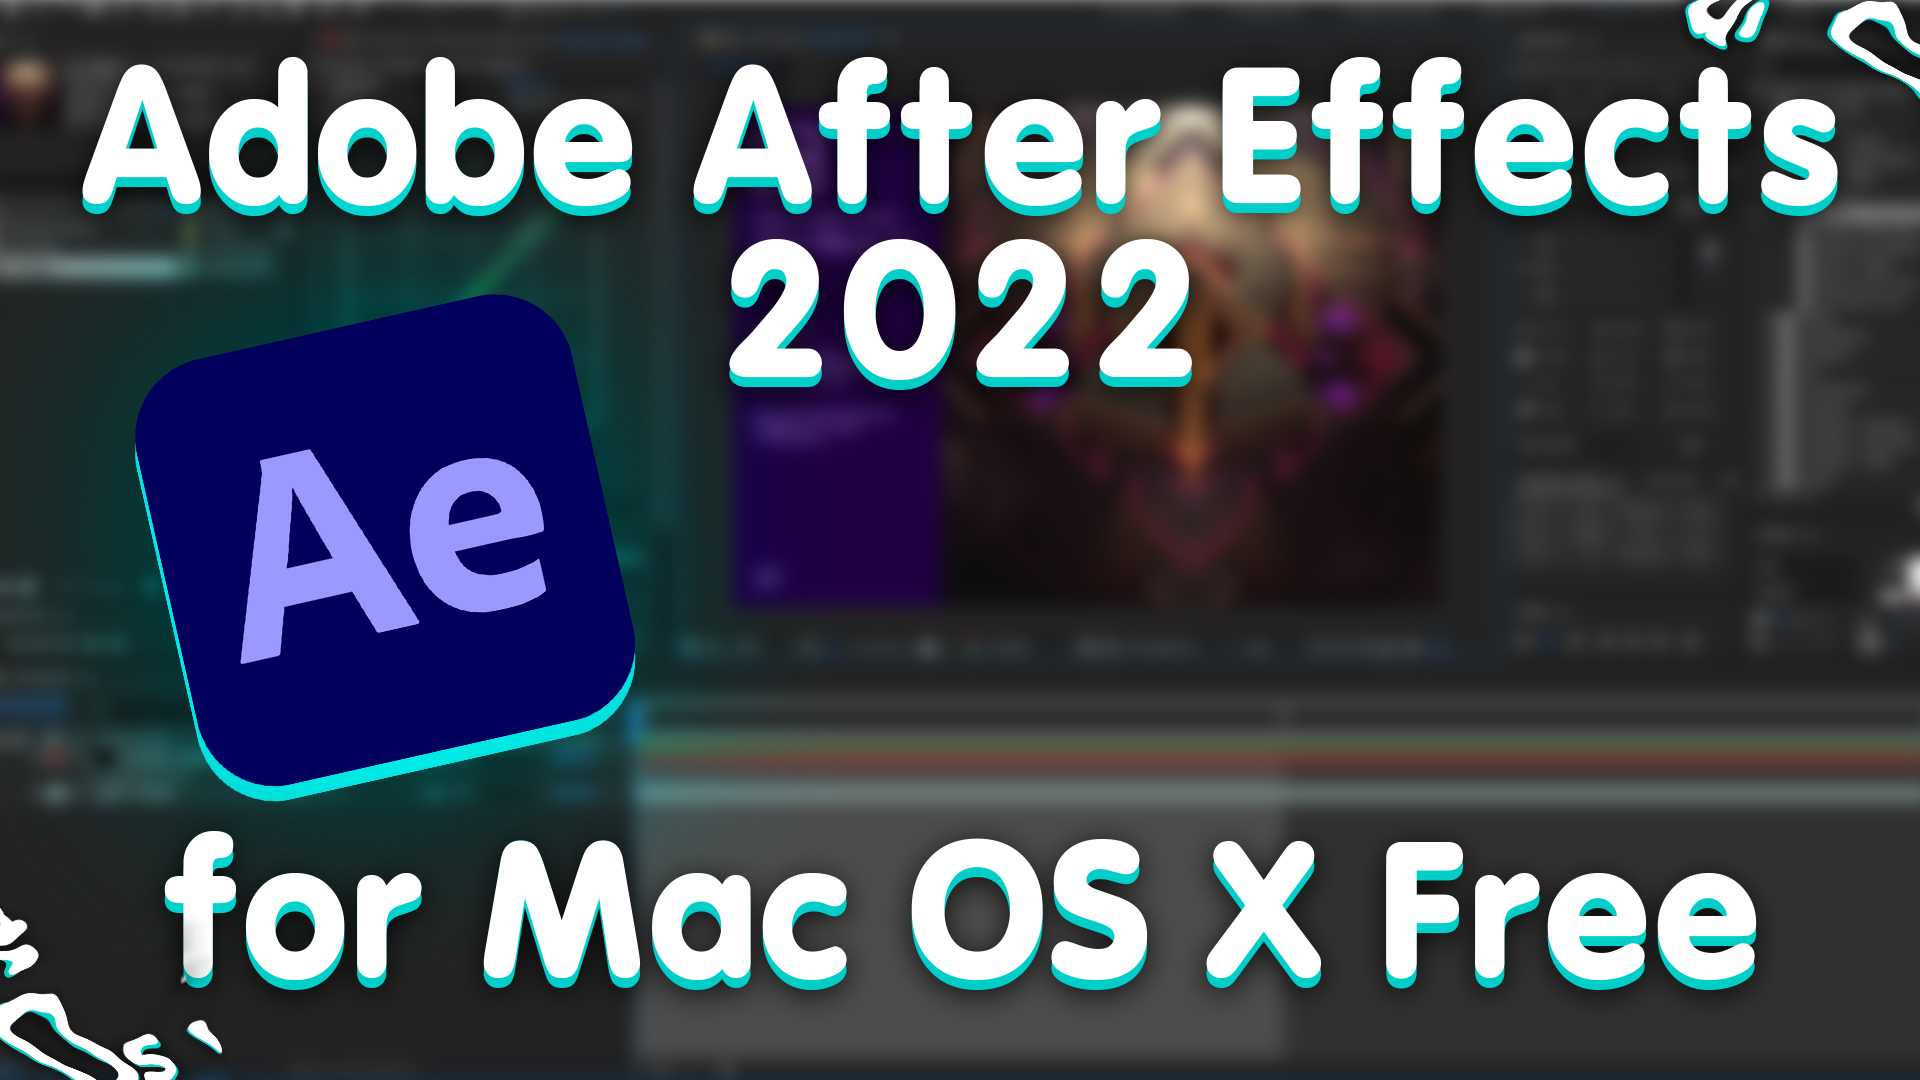 Adobe After Effects 2022 v22.0 for Mac OS X Free